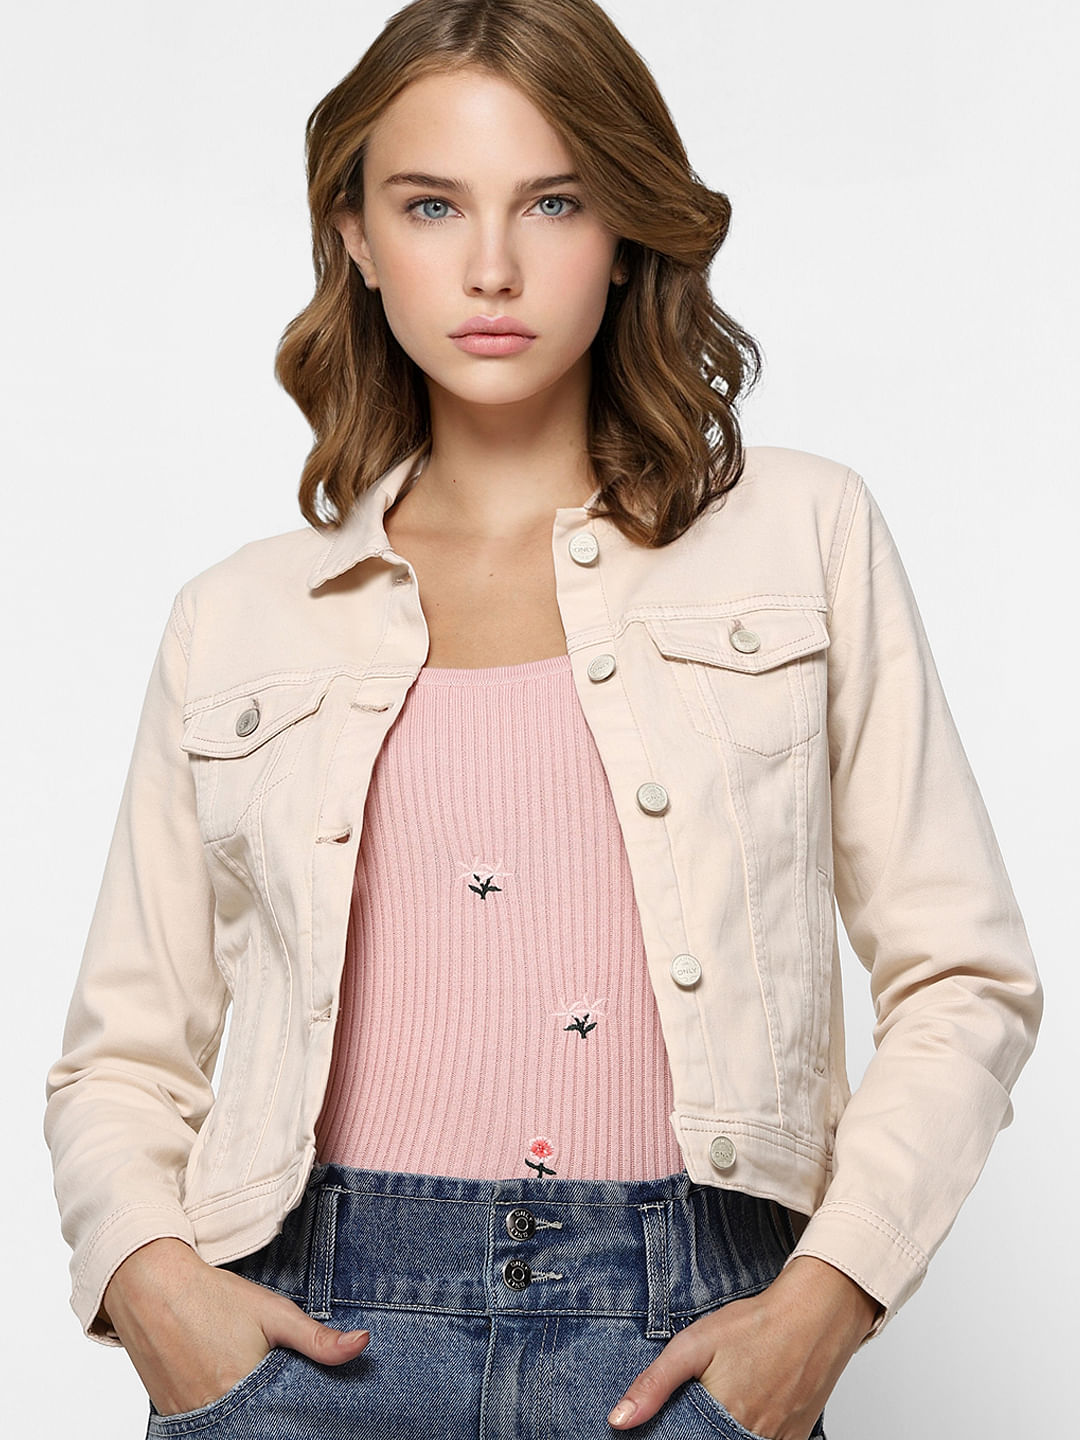 Women's Pink Jackets | Explore our New Arrivals | ZARA United Kingdom